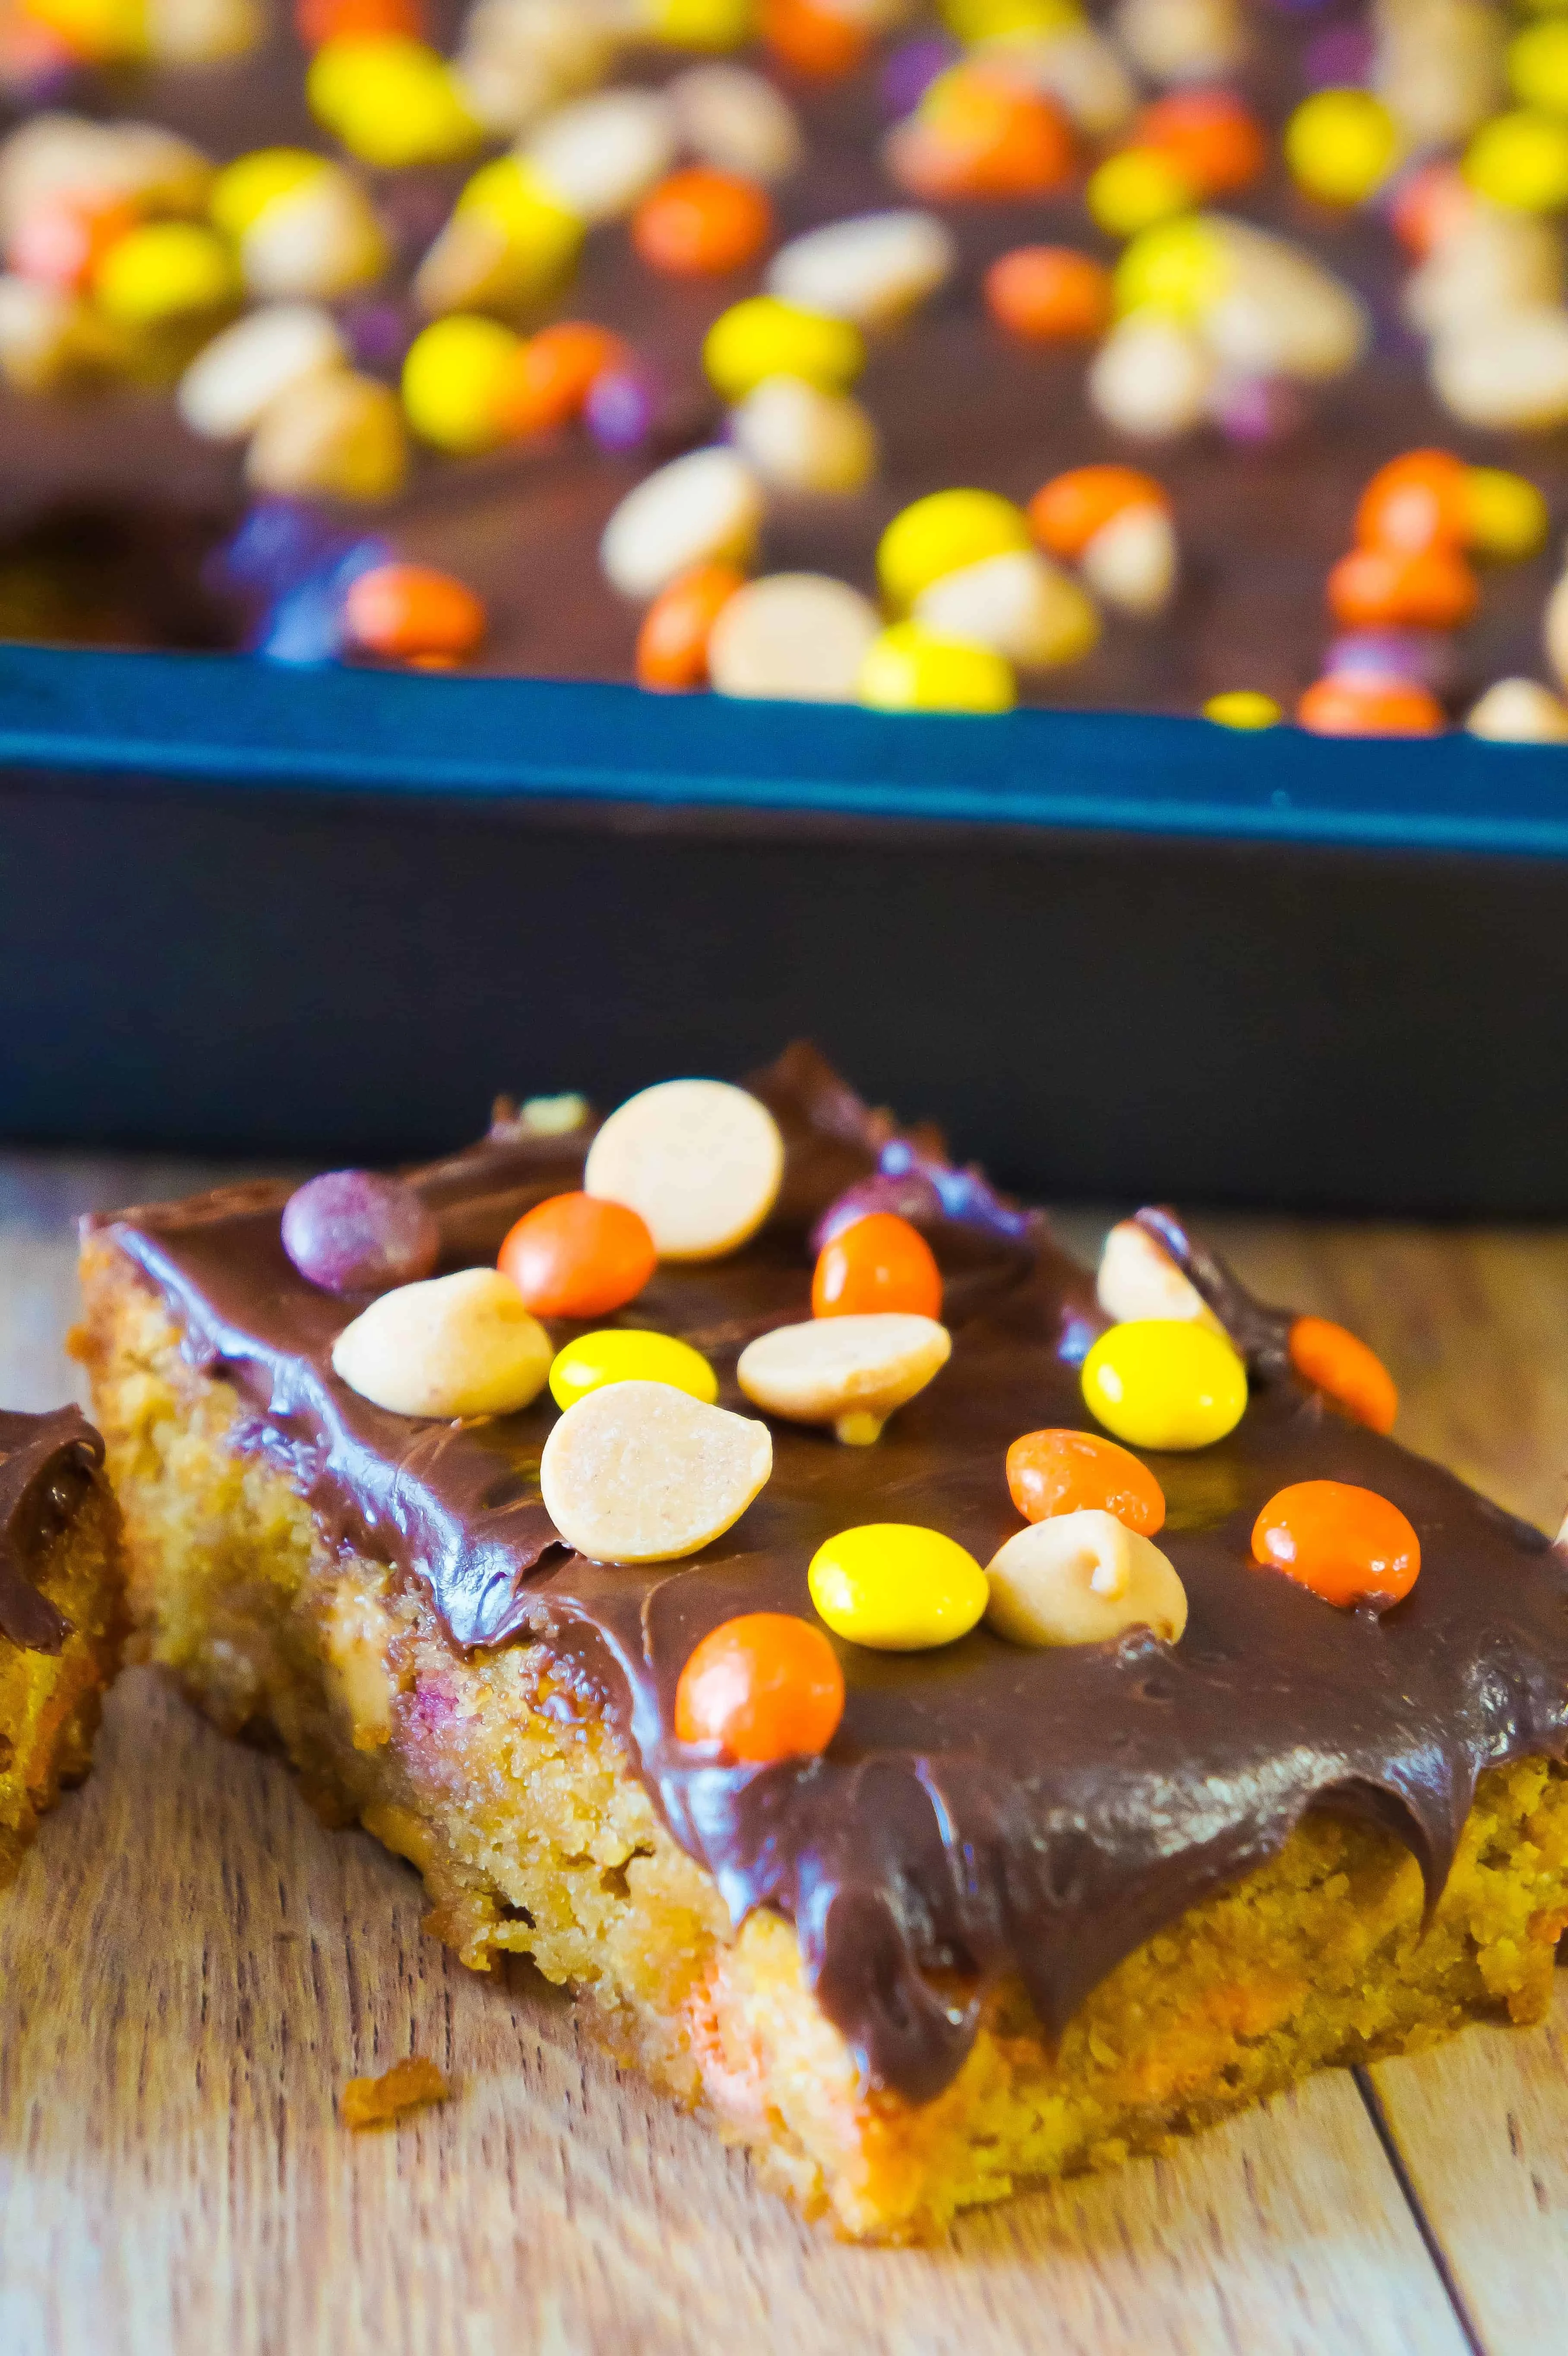 Chocolate Peanut Butter Blondies are an easy dessert recipe loaded with Reese's pieces and topped with chocolate frosting.